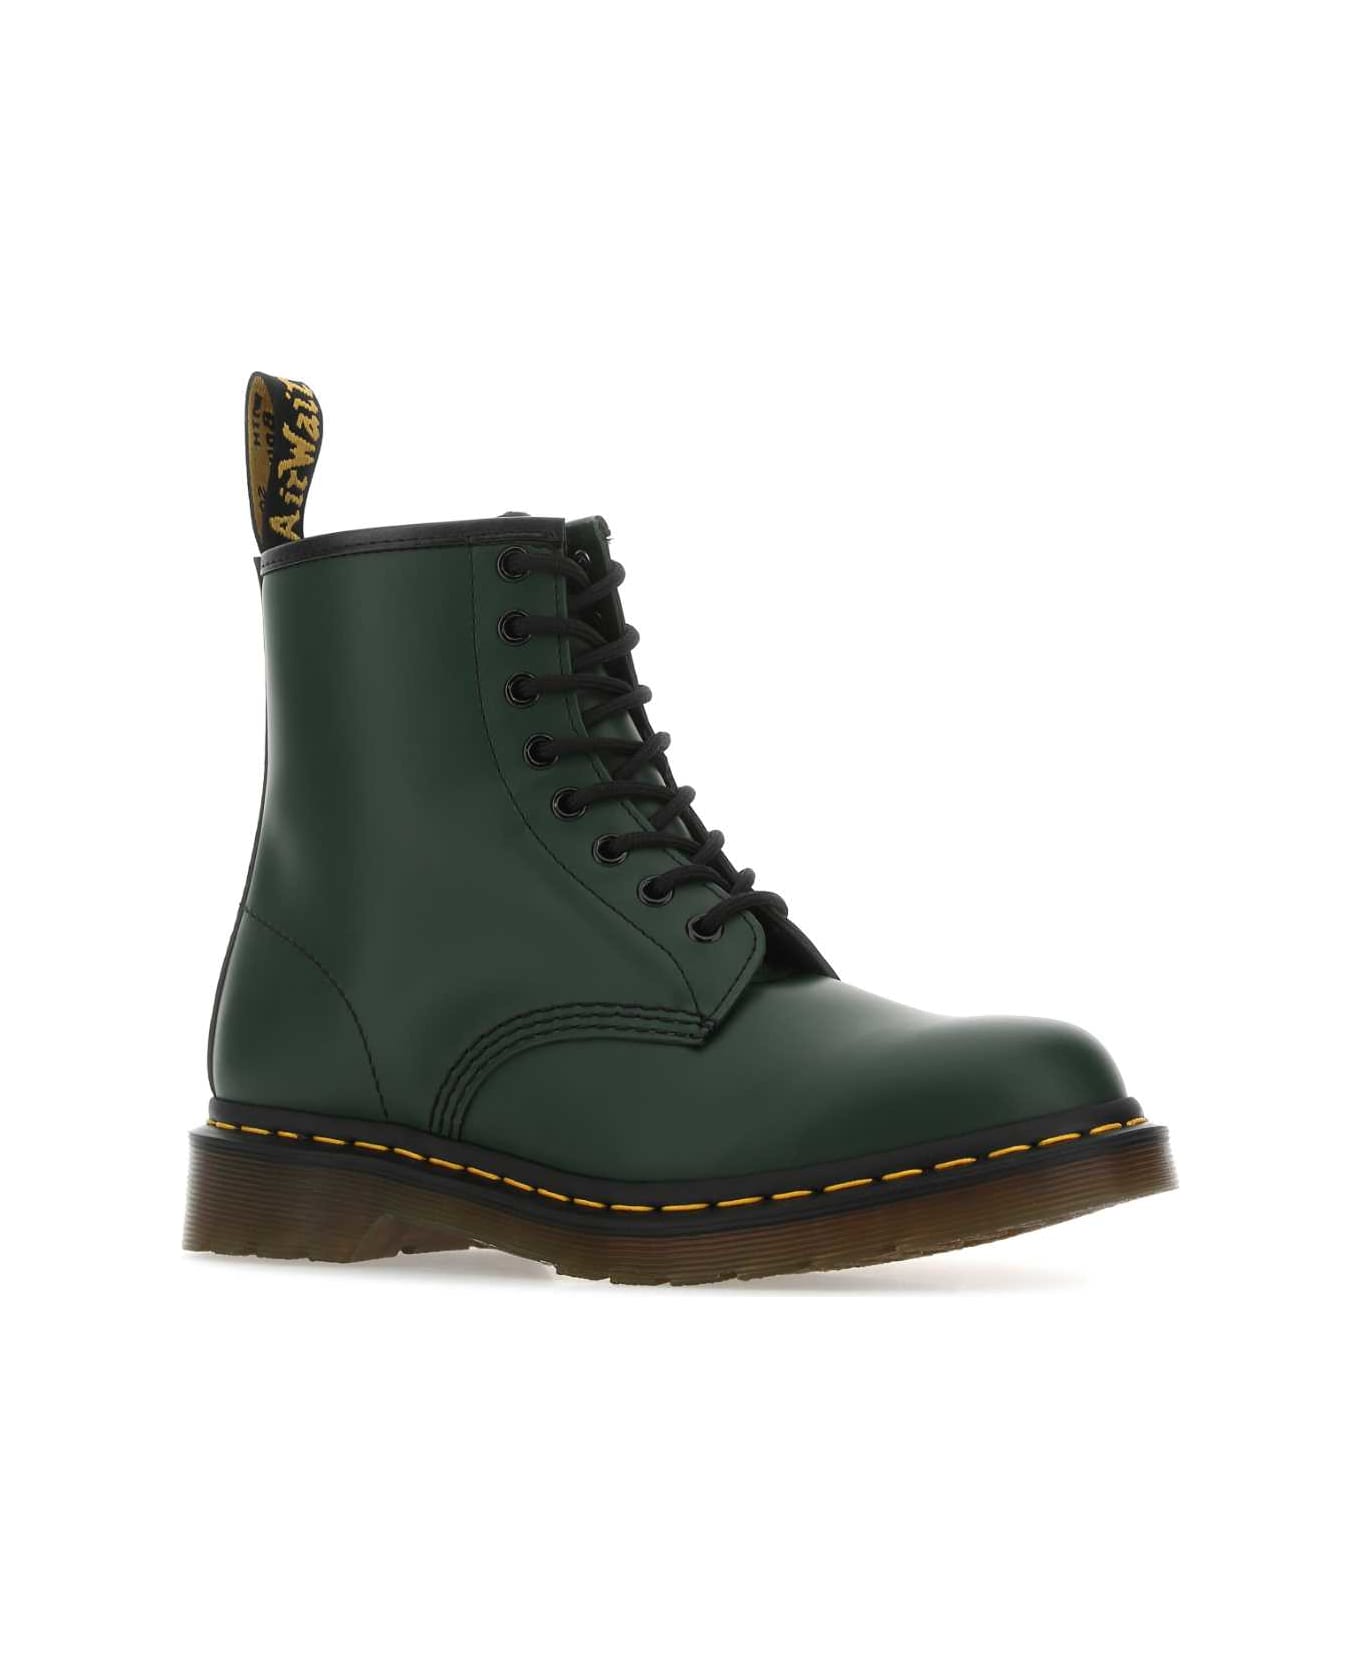 Dr. Martens Bottle Green Leather 1460 Ankle Boots - GreenSmooth name:458